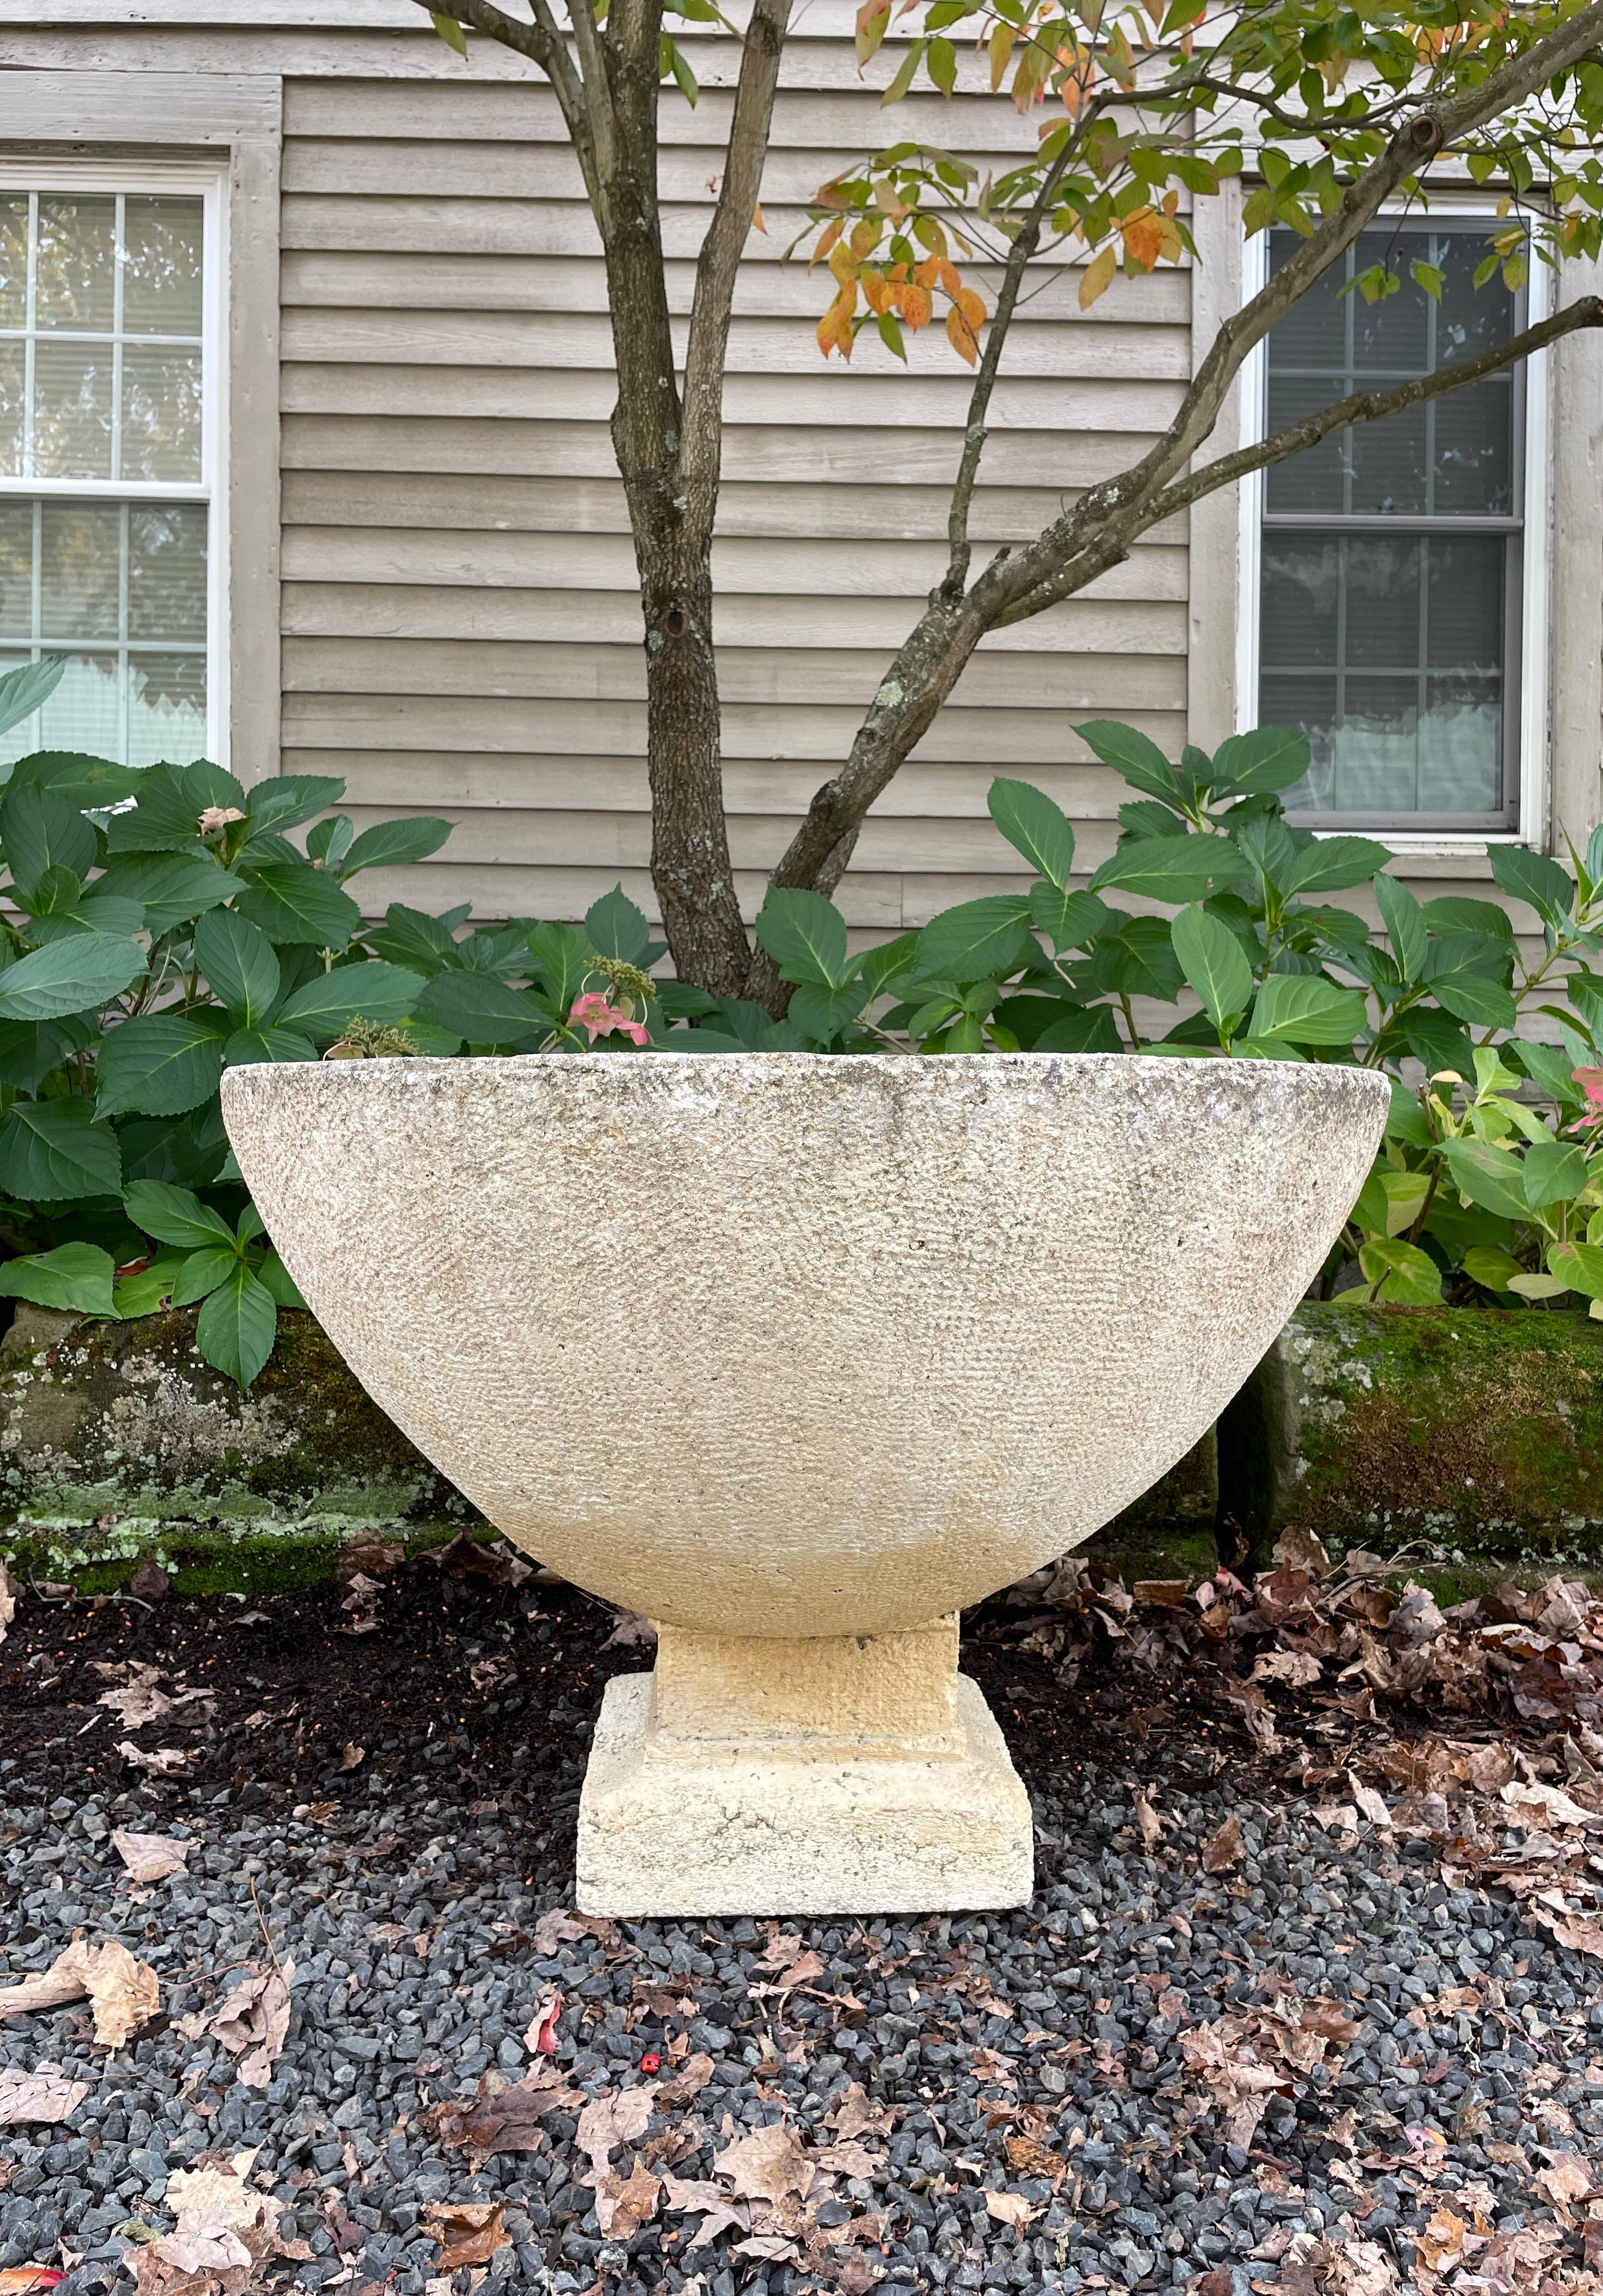 The form and patina on this mid-century French cast stone font are simply wonderful and its uses so varied. In two parts (the foot is separate from the bowl), it can be used as a font, planter, fountain, or fill it with sea shells and cover it with